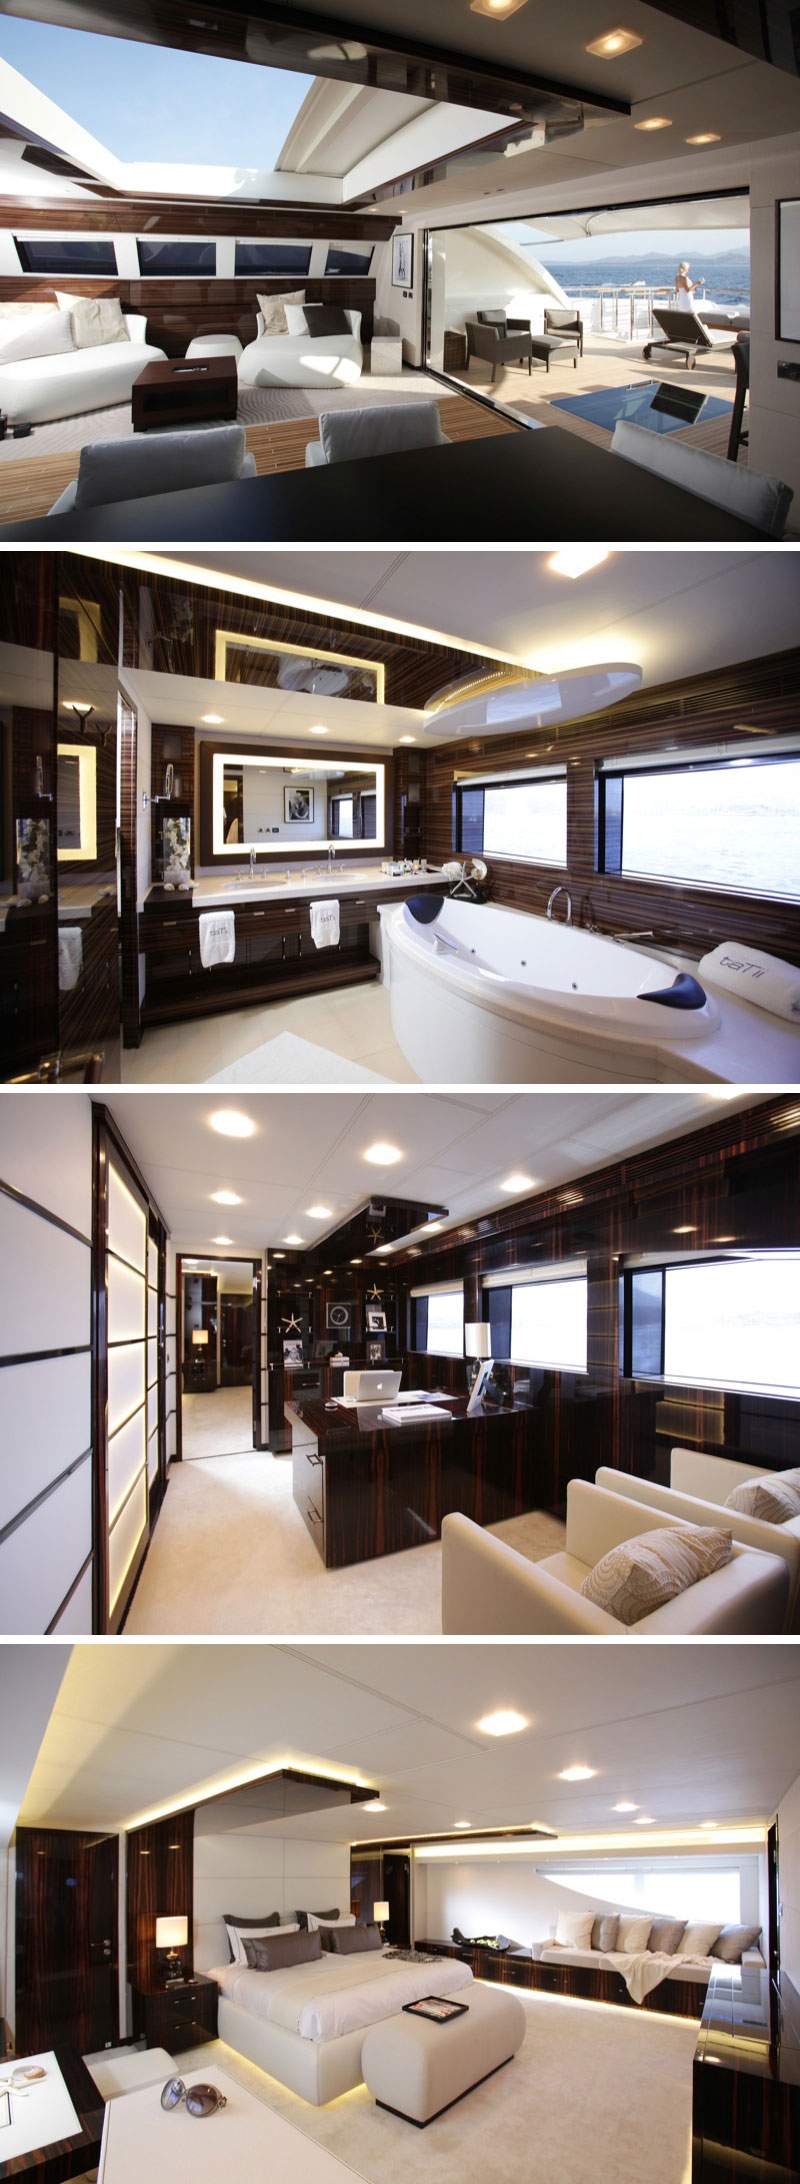 Extending over the entire width of the hull, the owner’s suite, like a boutique hotel on water, has been carefully considered. Comprising of a luxurious bathroom, an office, which can be used as a gym, sauna, or multi-functional room and three walk-in wardrobes, the atmosphere is one of intimacy and coziness.